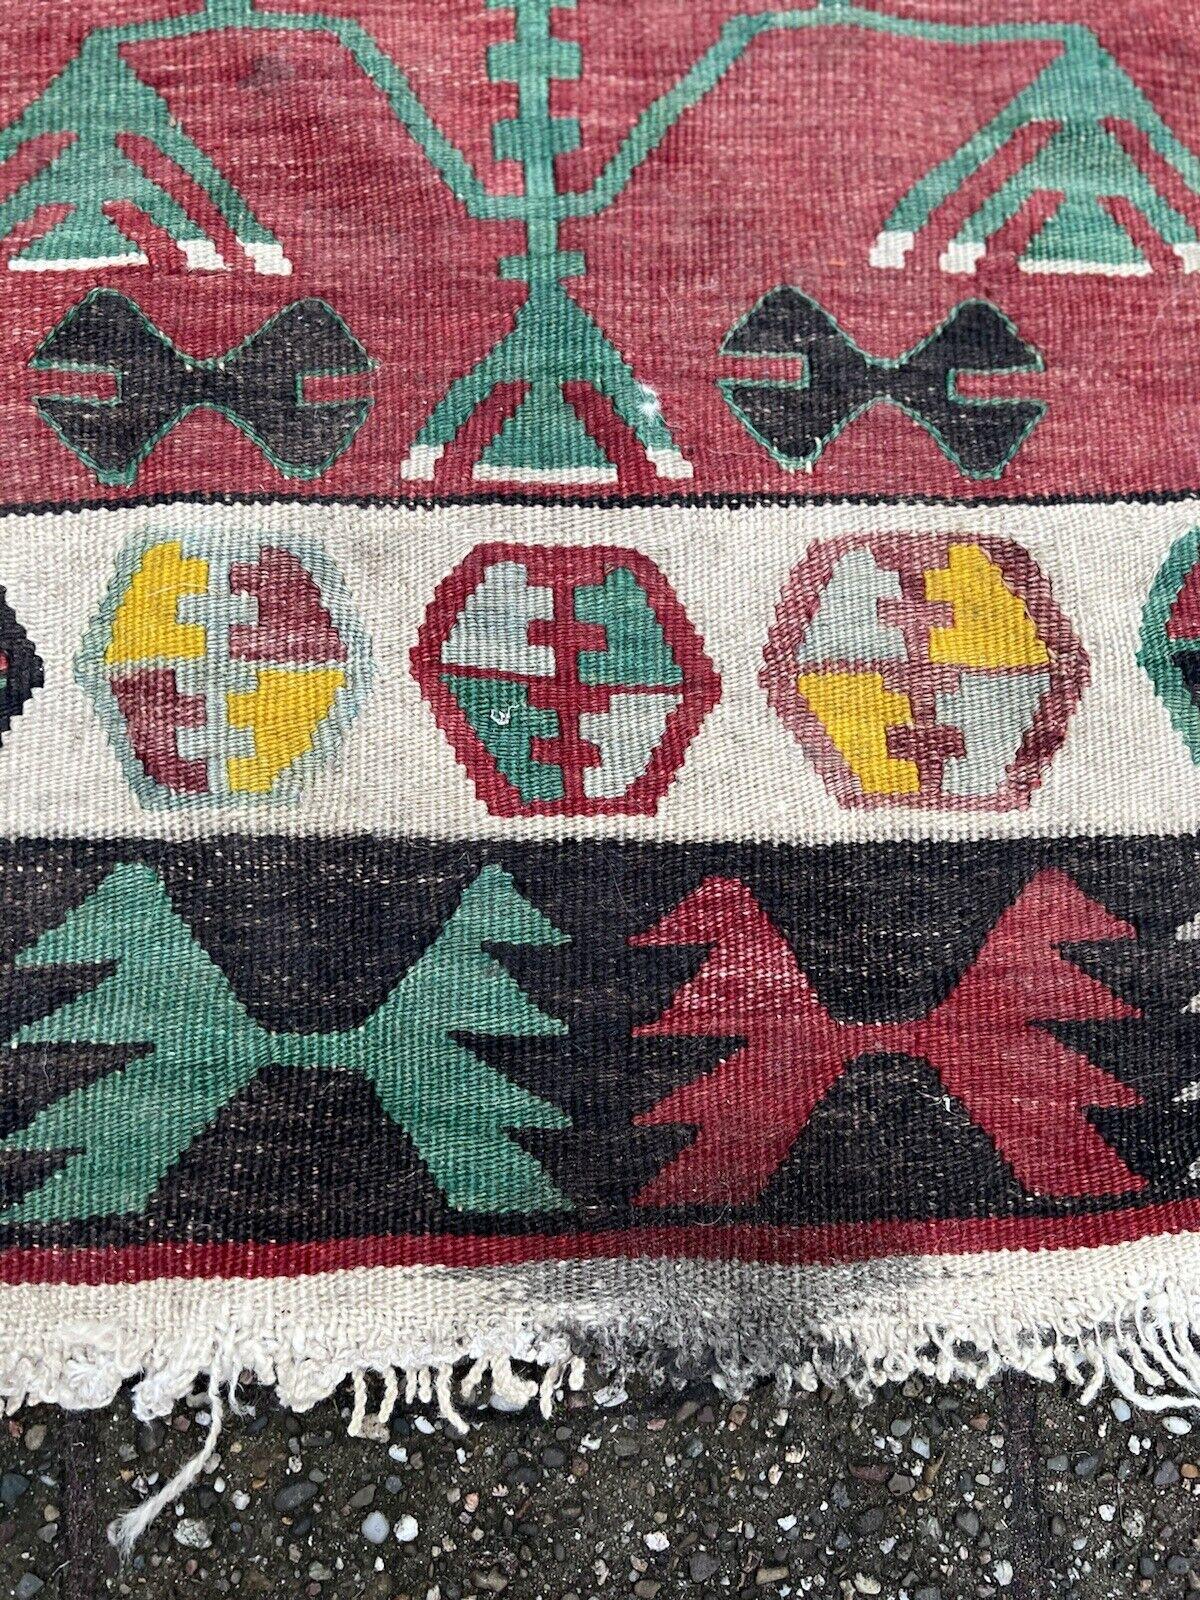 Handmade Vintage Turkish Anatolian Kilim Rug 3' x 4.7', 1970s - 1S62 In Good Condition For Sale In Bordeaux, FR